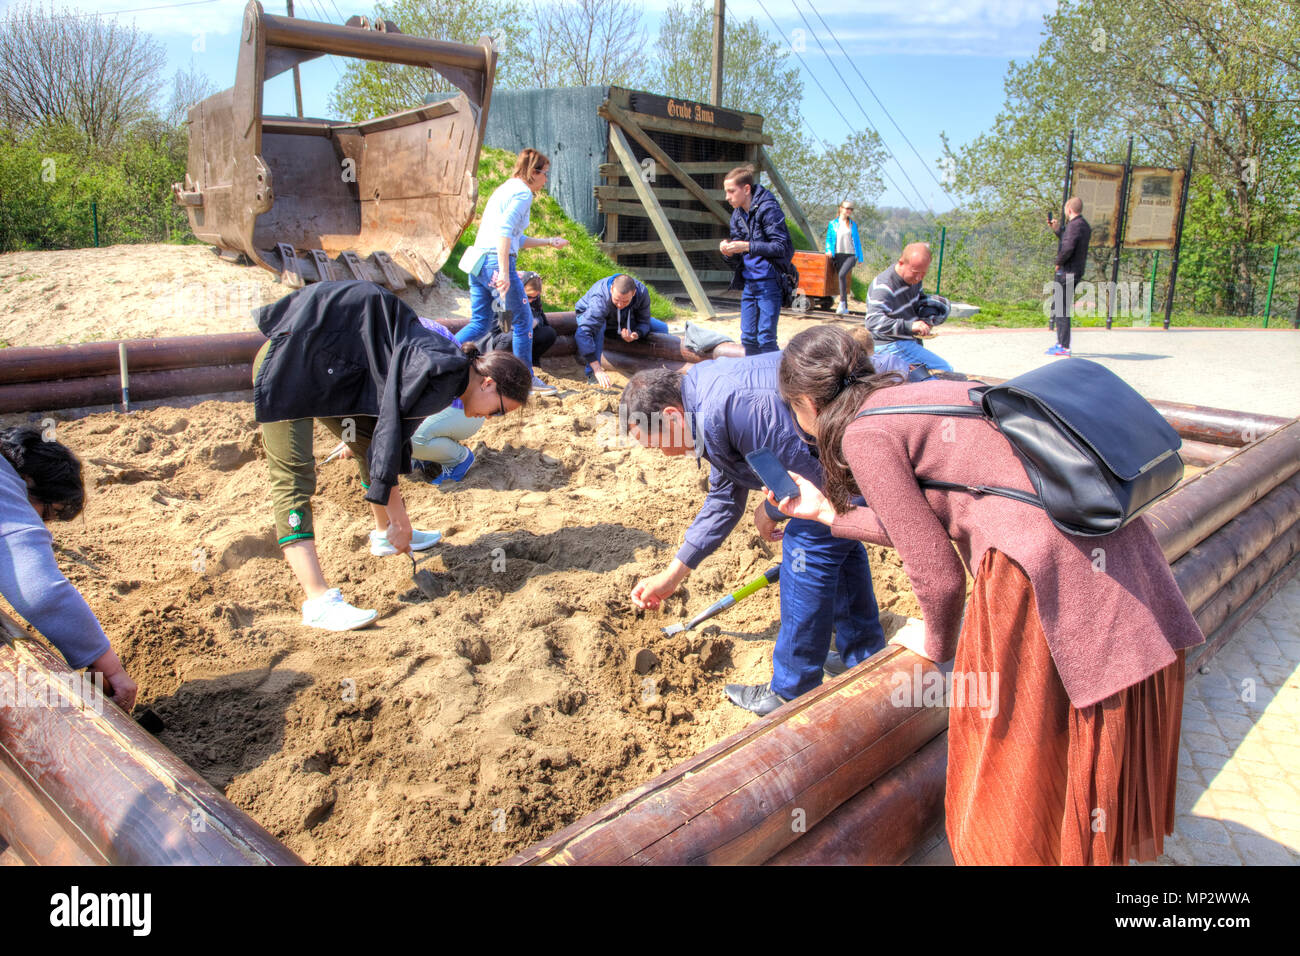 KALININGRAD, RUSSIA - April 29.2018: Tourists are looking for pieces of amber in the sand on the observation deck of the Primorsky quarry. The village Stock Photo